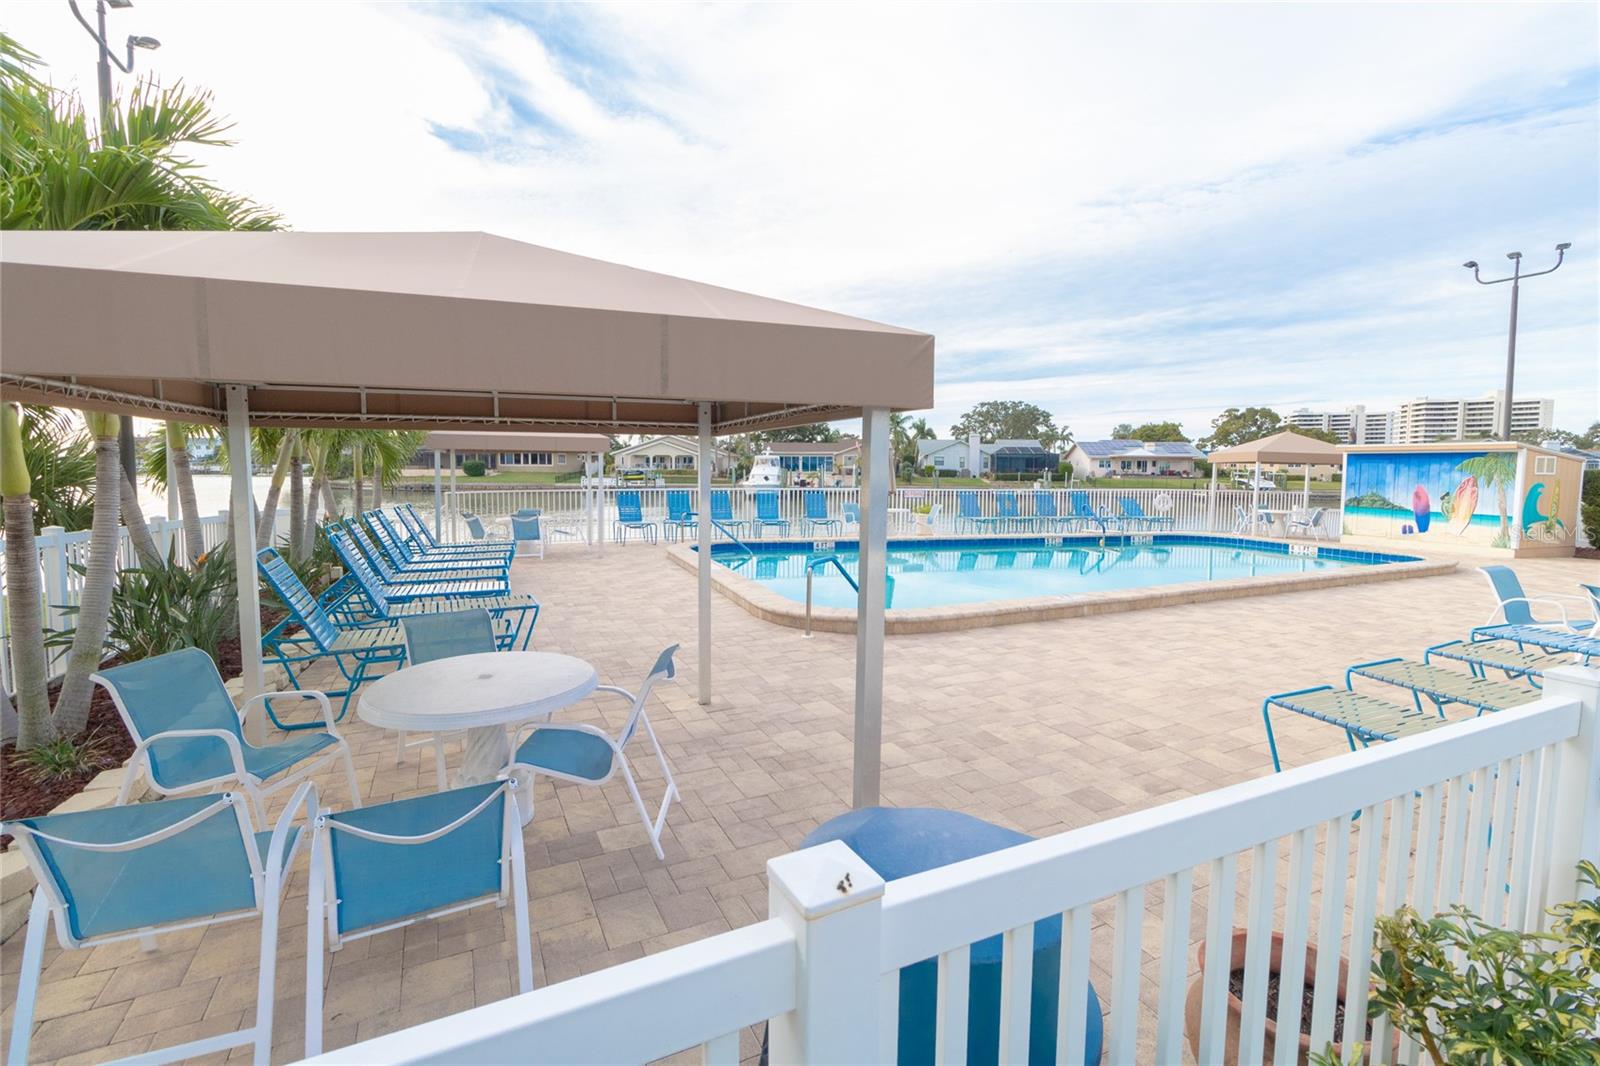 Another Of the Community's Four Heated Pools, One Of Two That Are Located On The Waterfront!